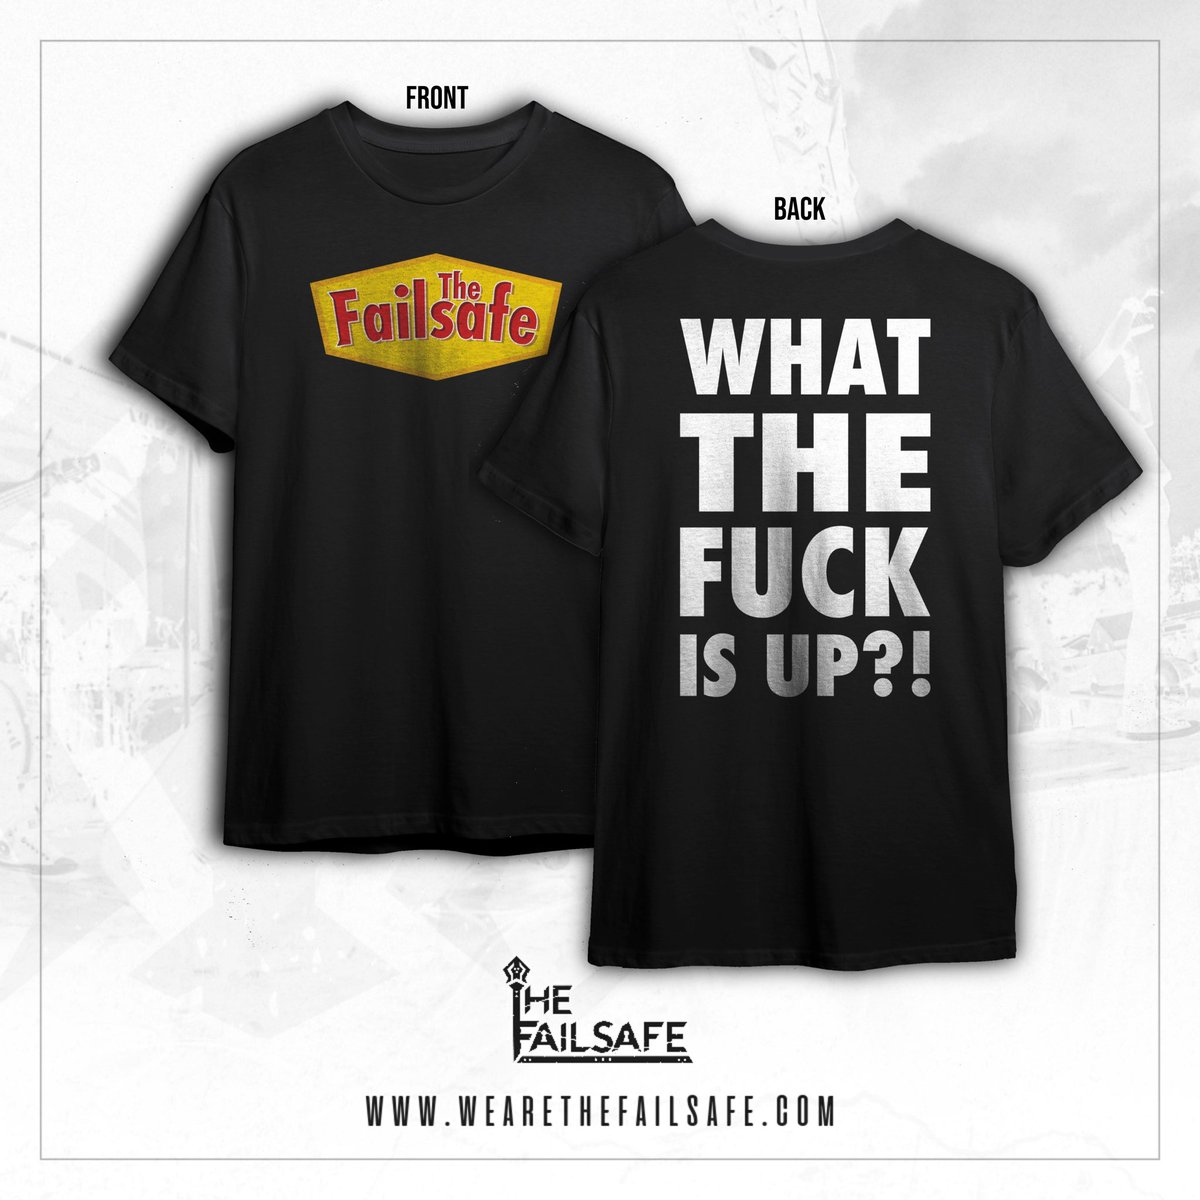 What the F#%k's up? 🤘 FINAL MERCH RESTOCK - Grab your Failsafe Dennys tee before they're gone for good! #bandmerch